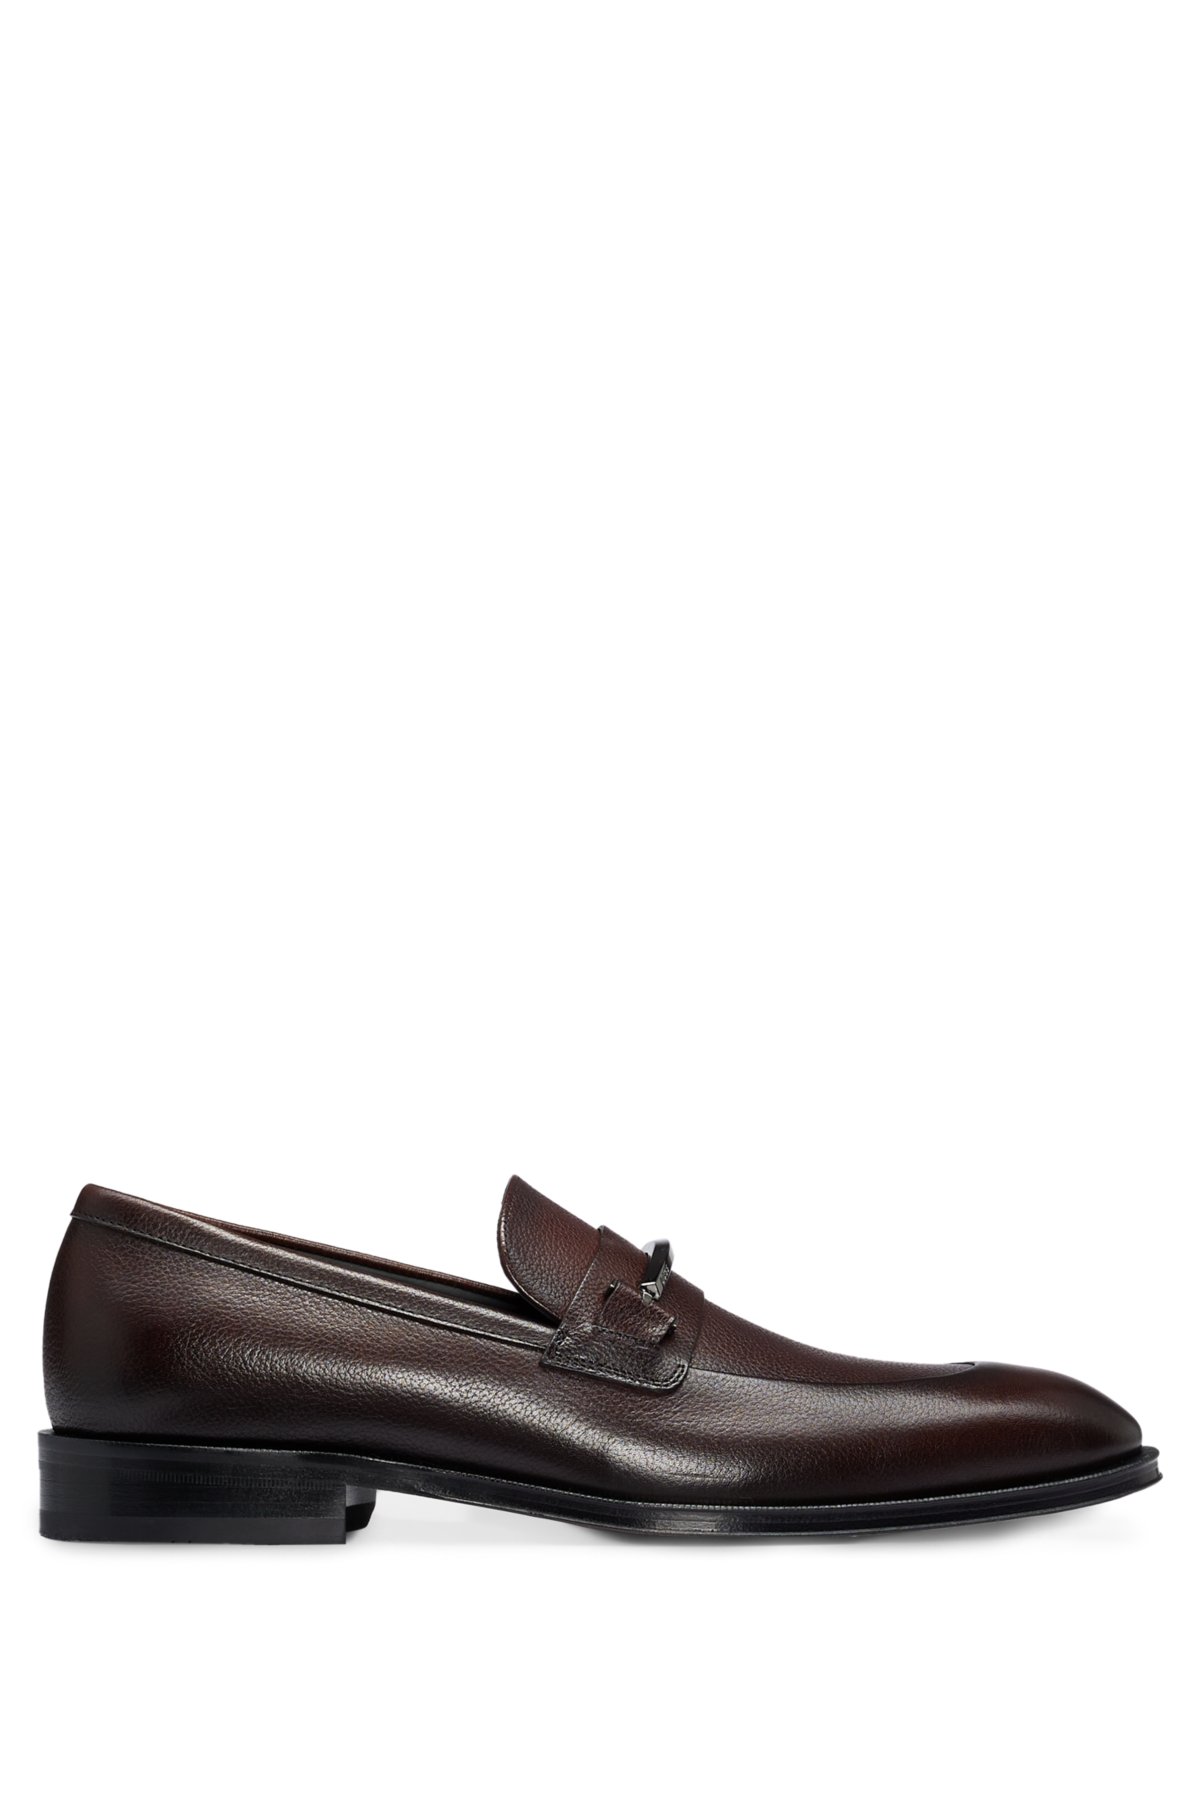 Grained-leather loafers with branded trim and apron toe, Dark Brown